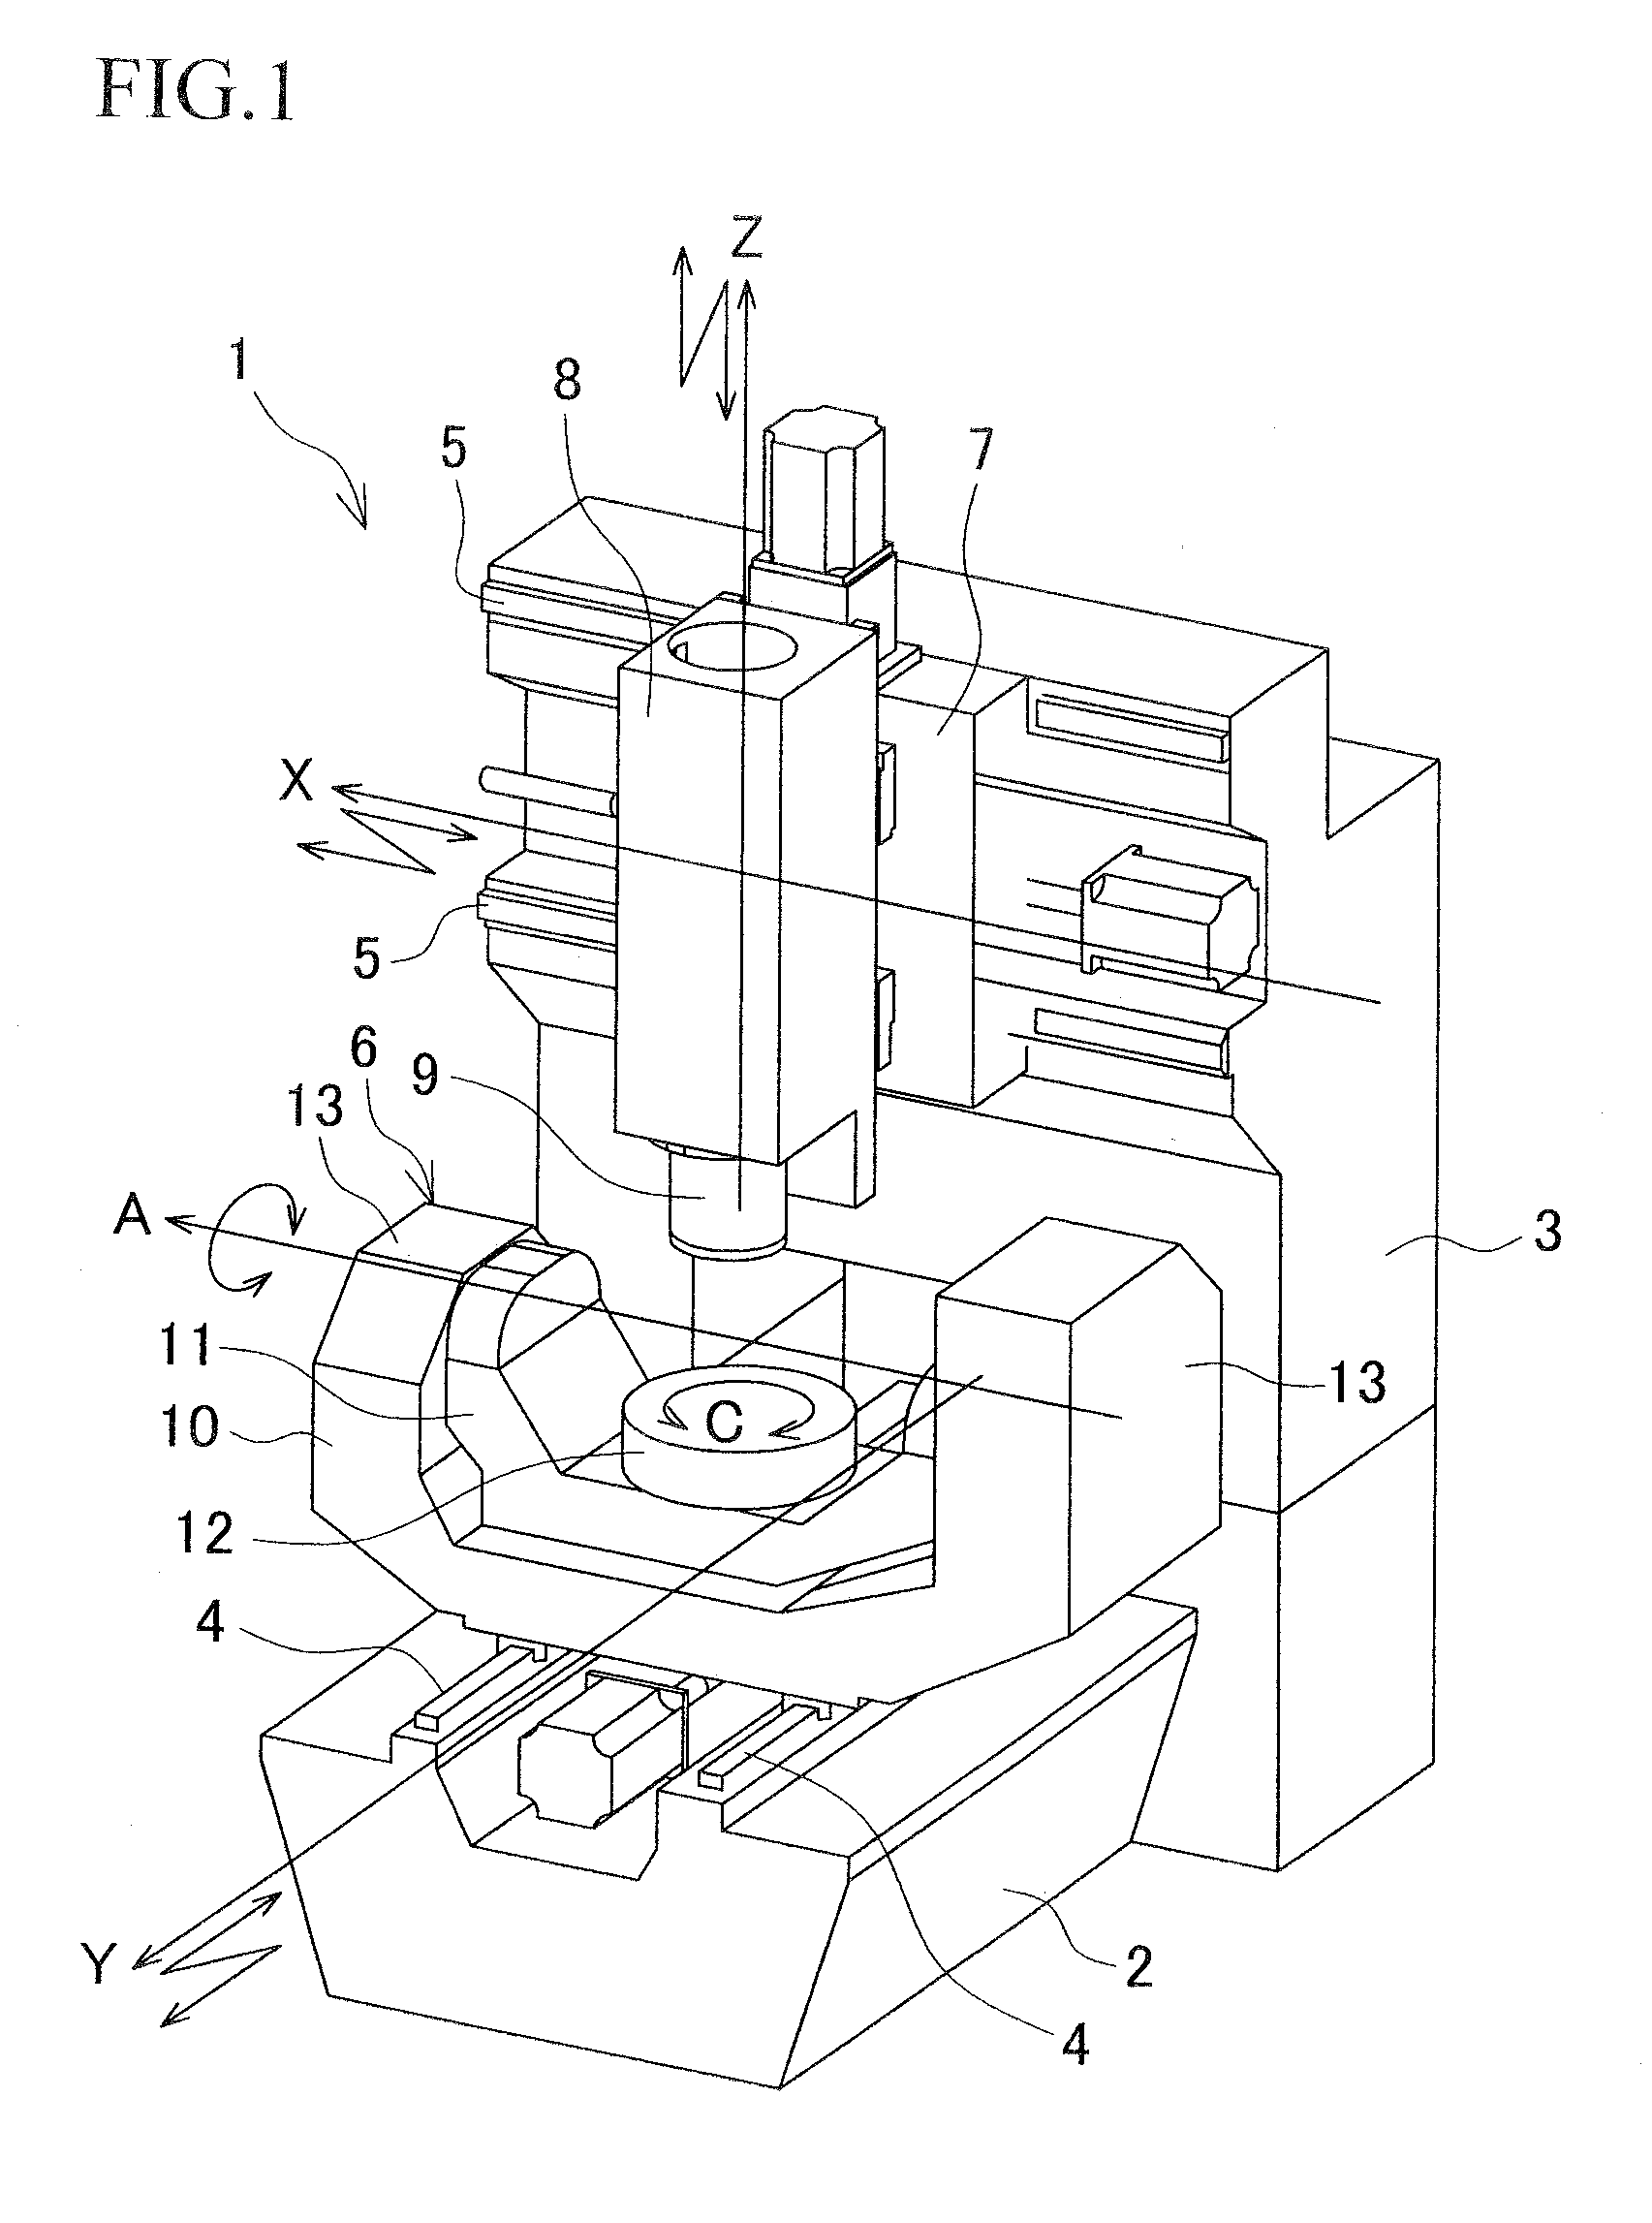 Table unit for machine tool